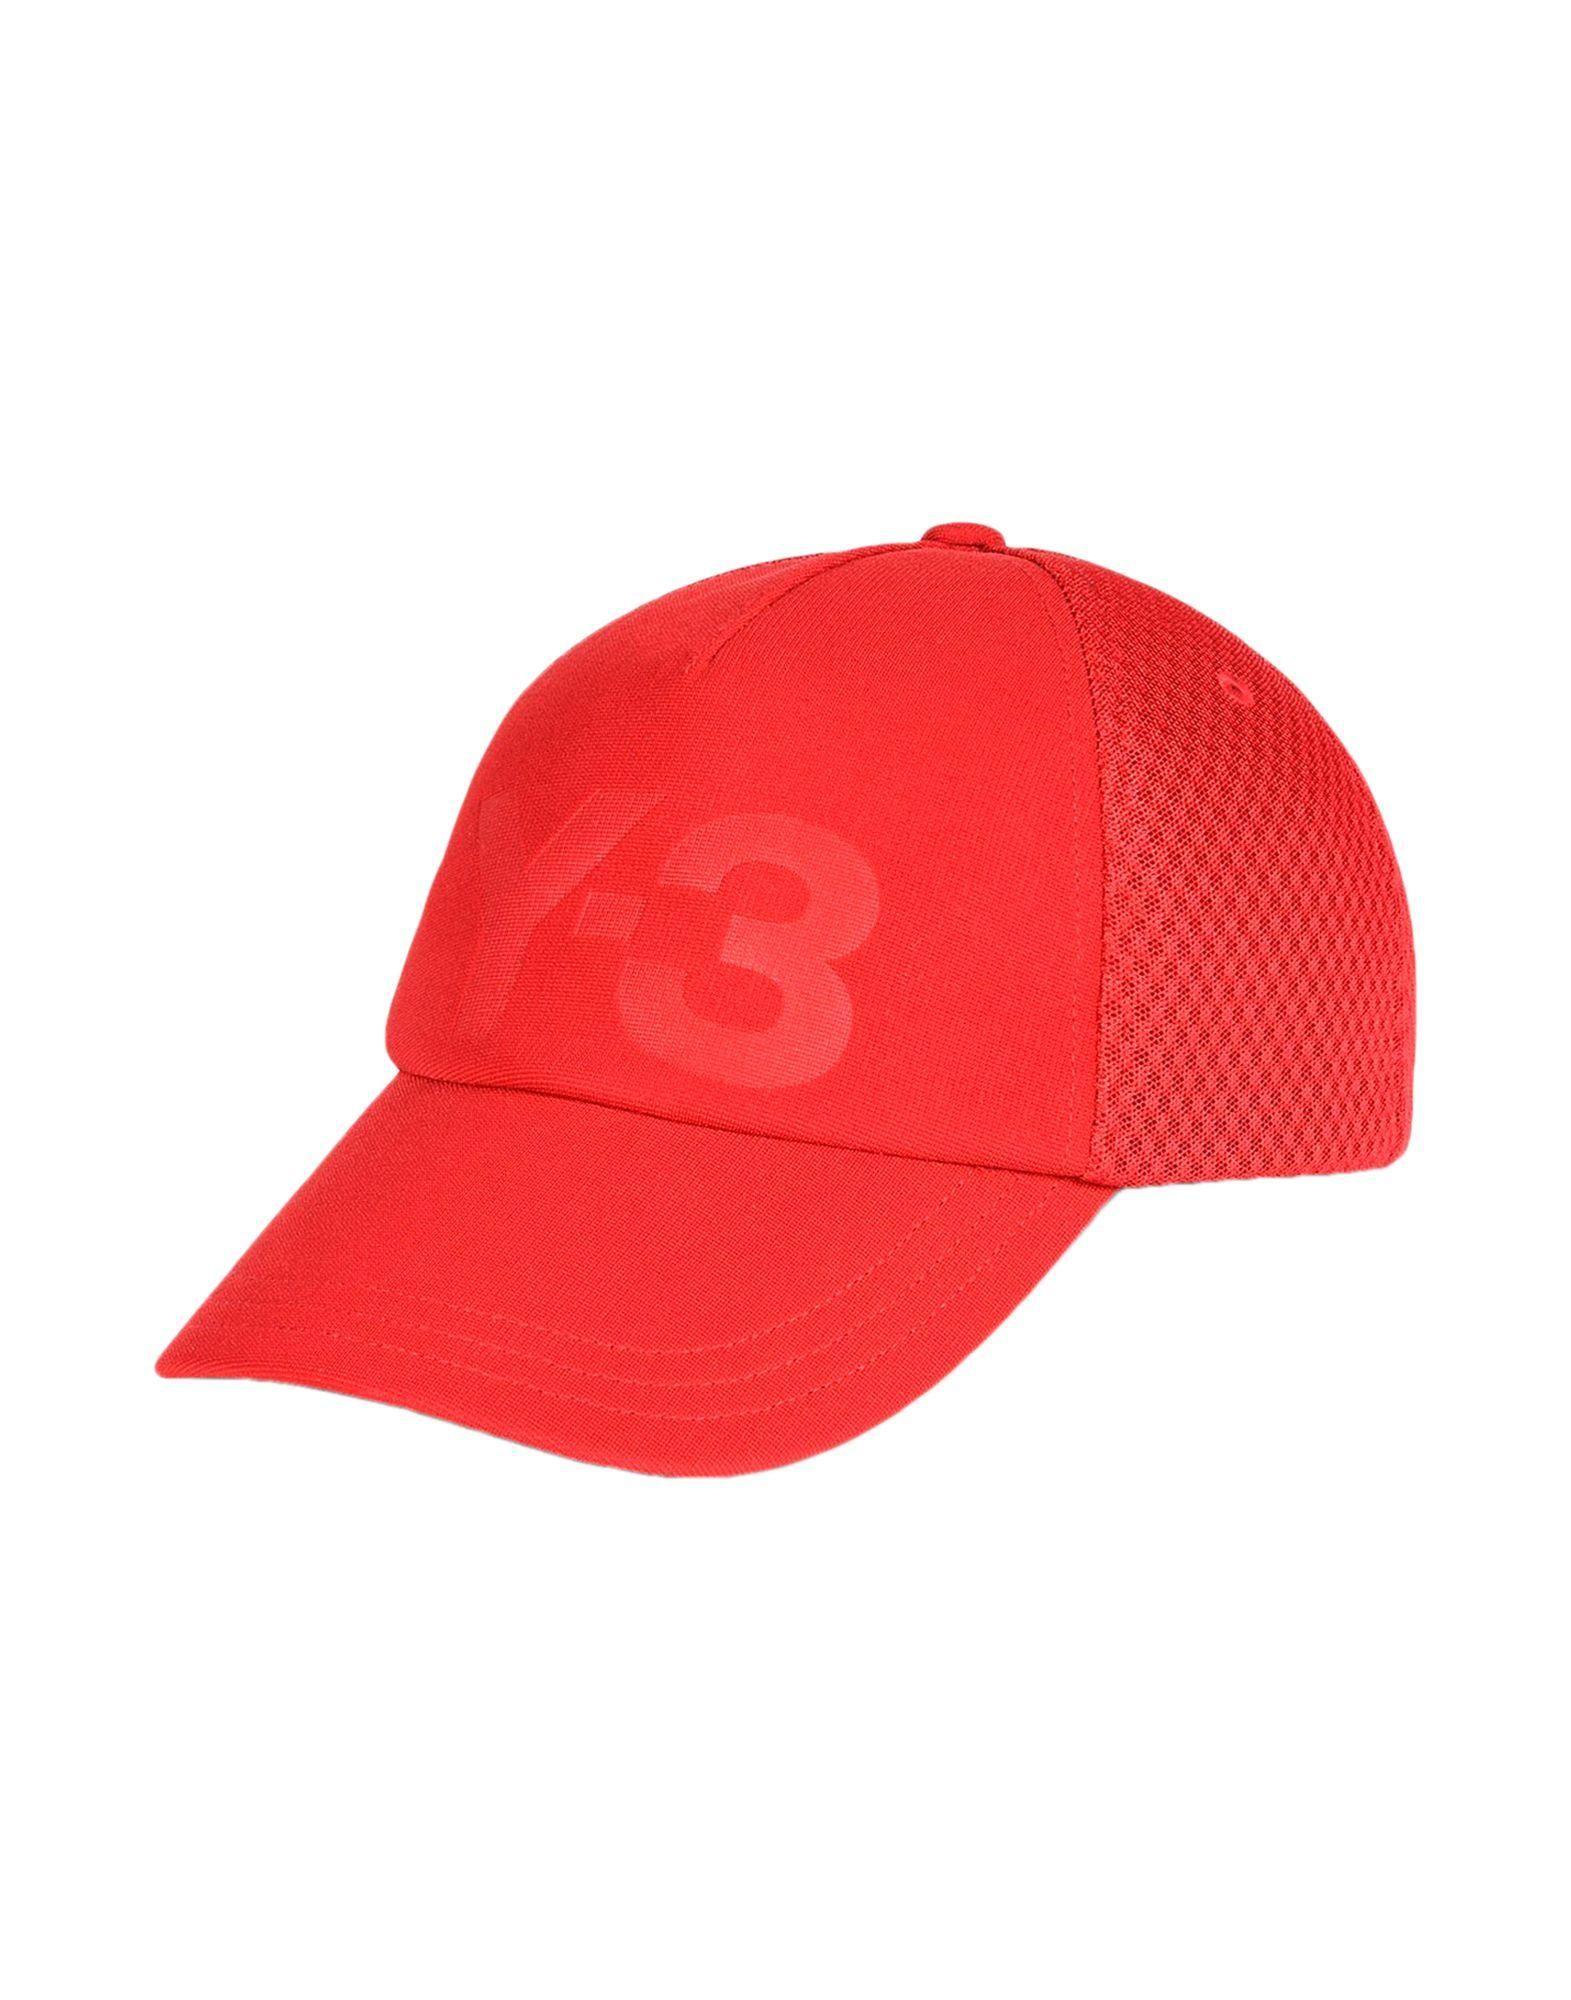 Man with Red Hat Logo - Y-3 Hat in Red for Men - Lyst